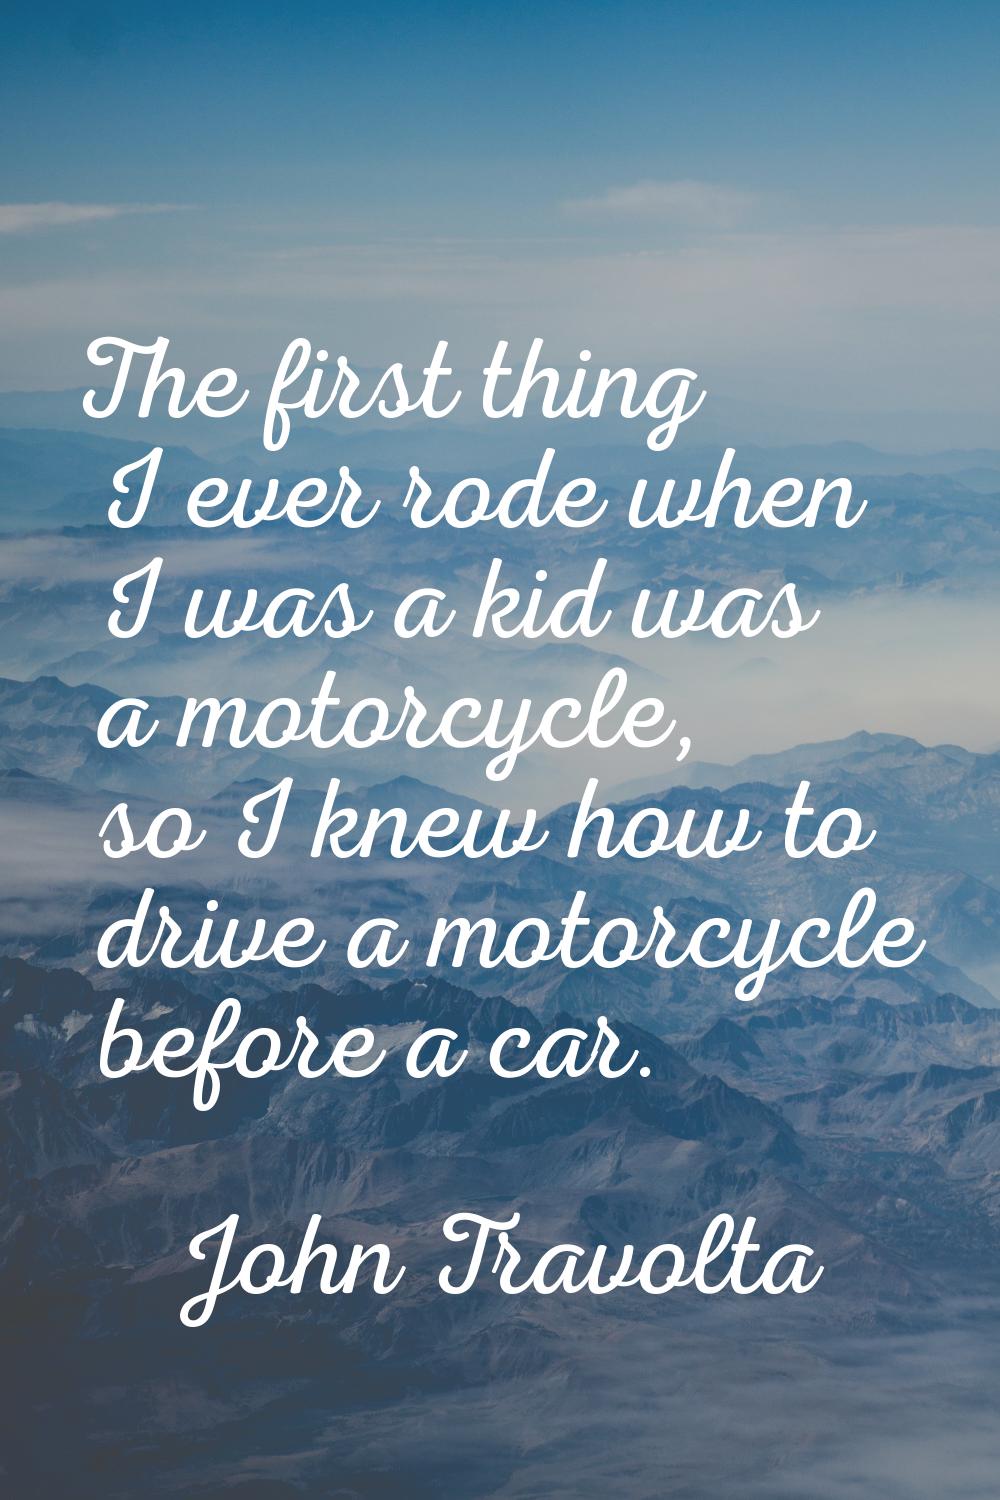 The first thing I ever rode when I was a kid was a motorcycle, so I knew how to drive a motorcycle 